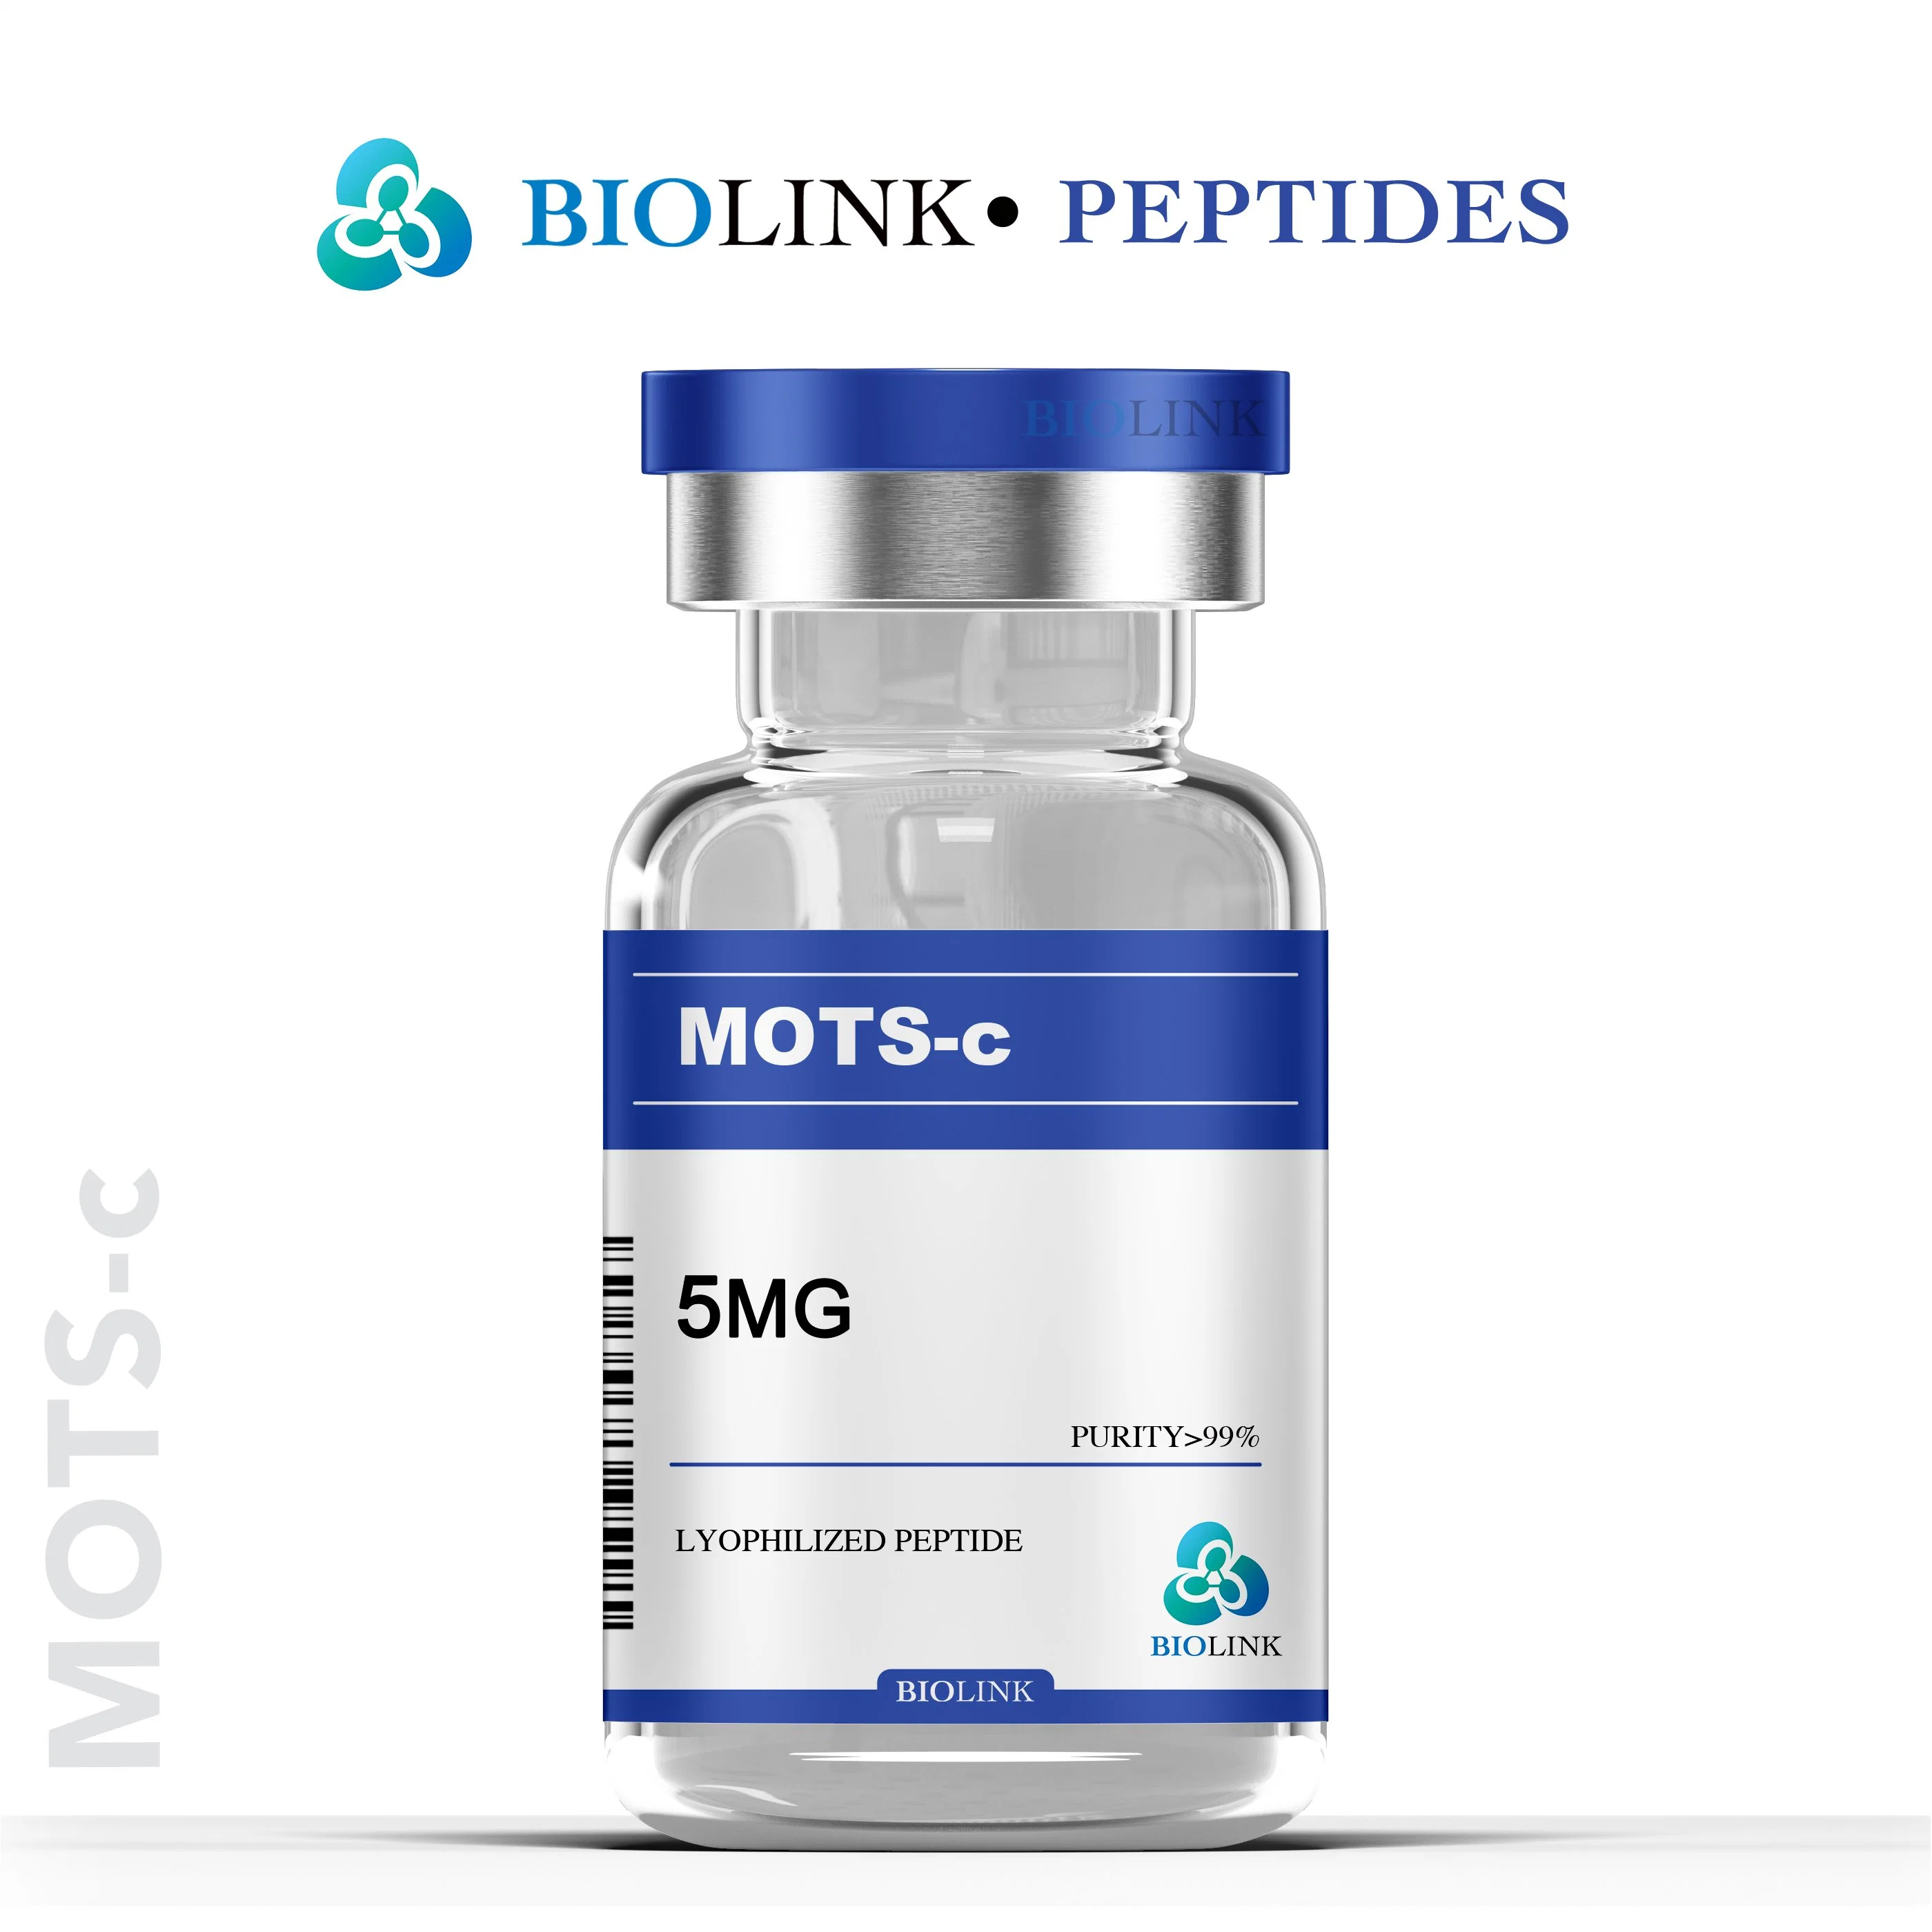 Mitochondrial Signaling Peptide Mots-C 5mg 10mg for Type 2 Diabetes and Obesity USA Stock CAS: 1627580-64-6